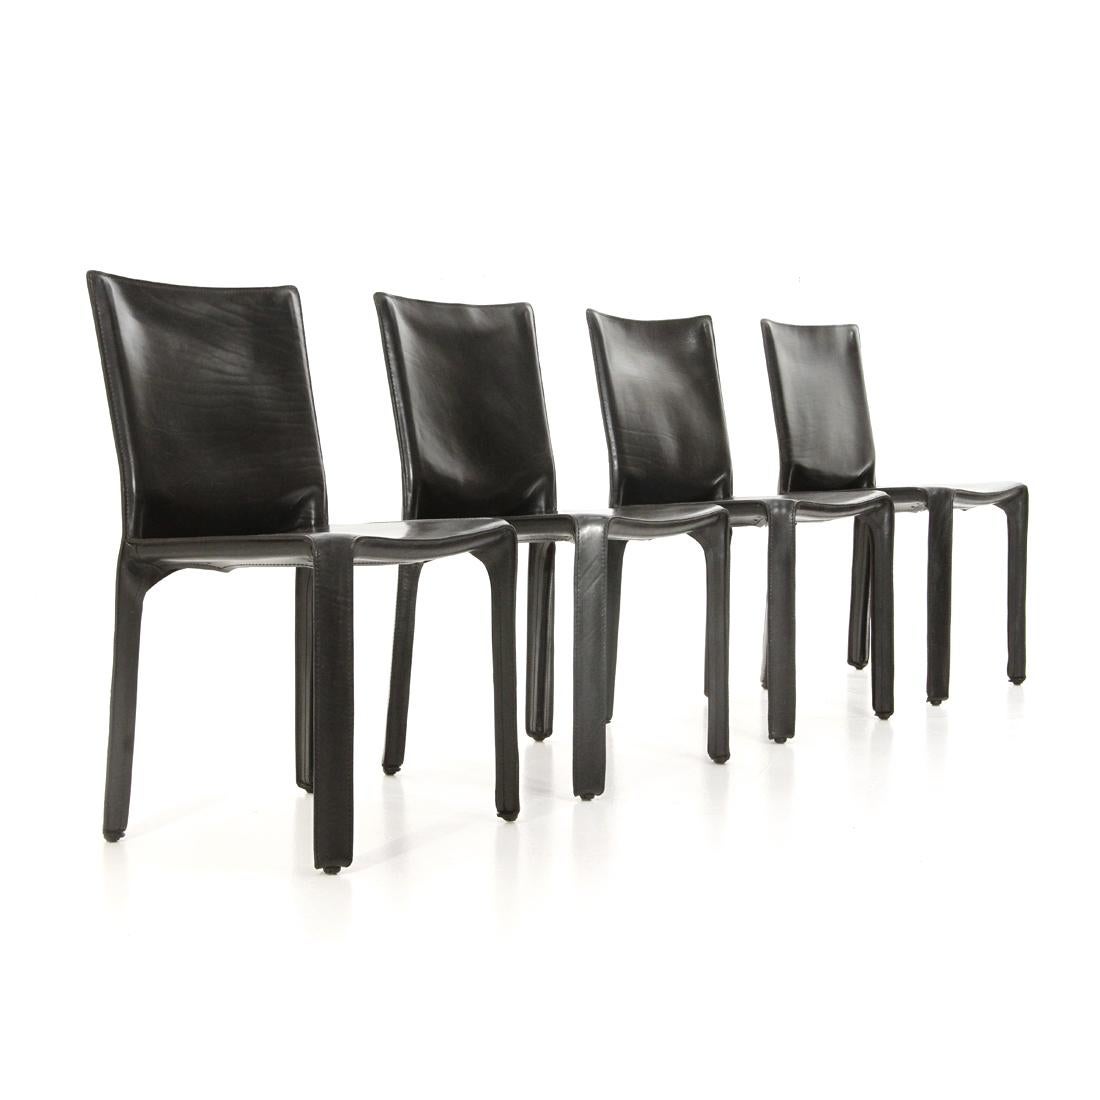 Mid-Century Modern 4 “CAB” Chairs in Black Leather by Mario Bellini for Cassina, 1970s